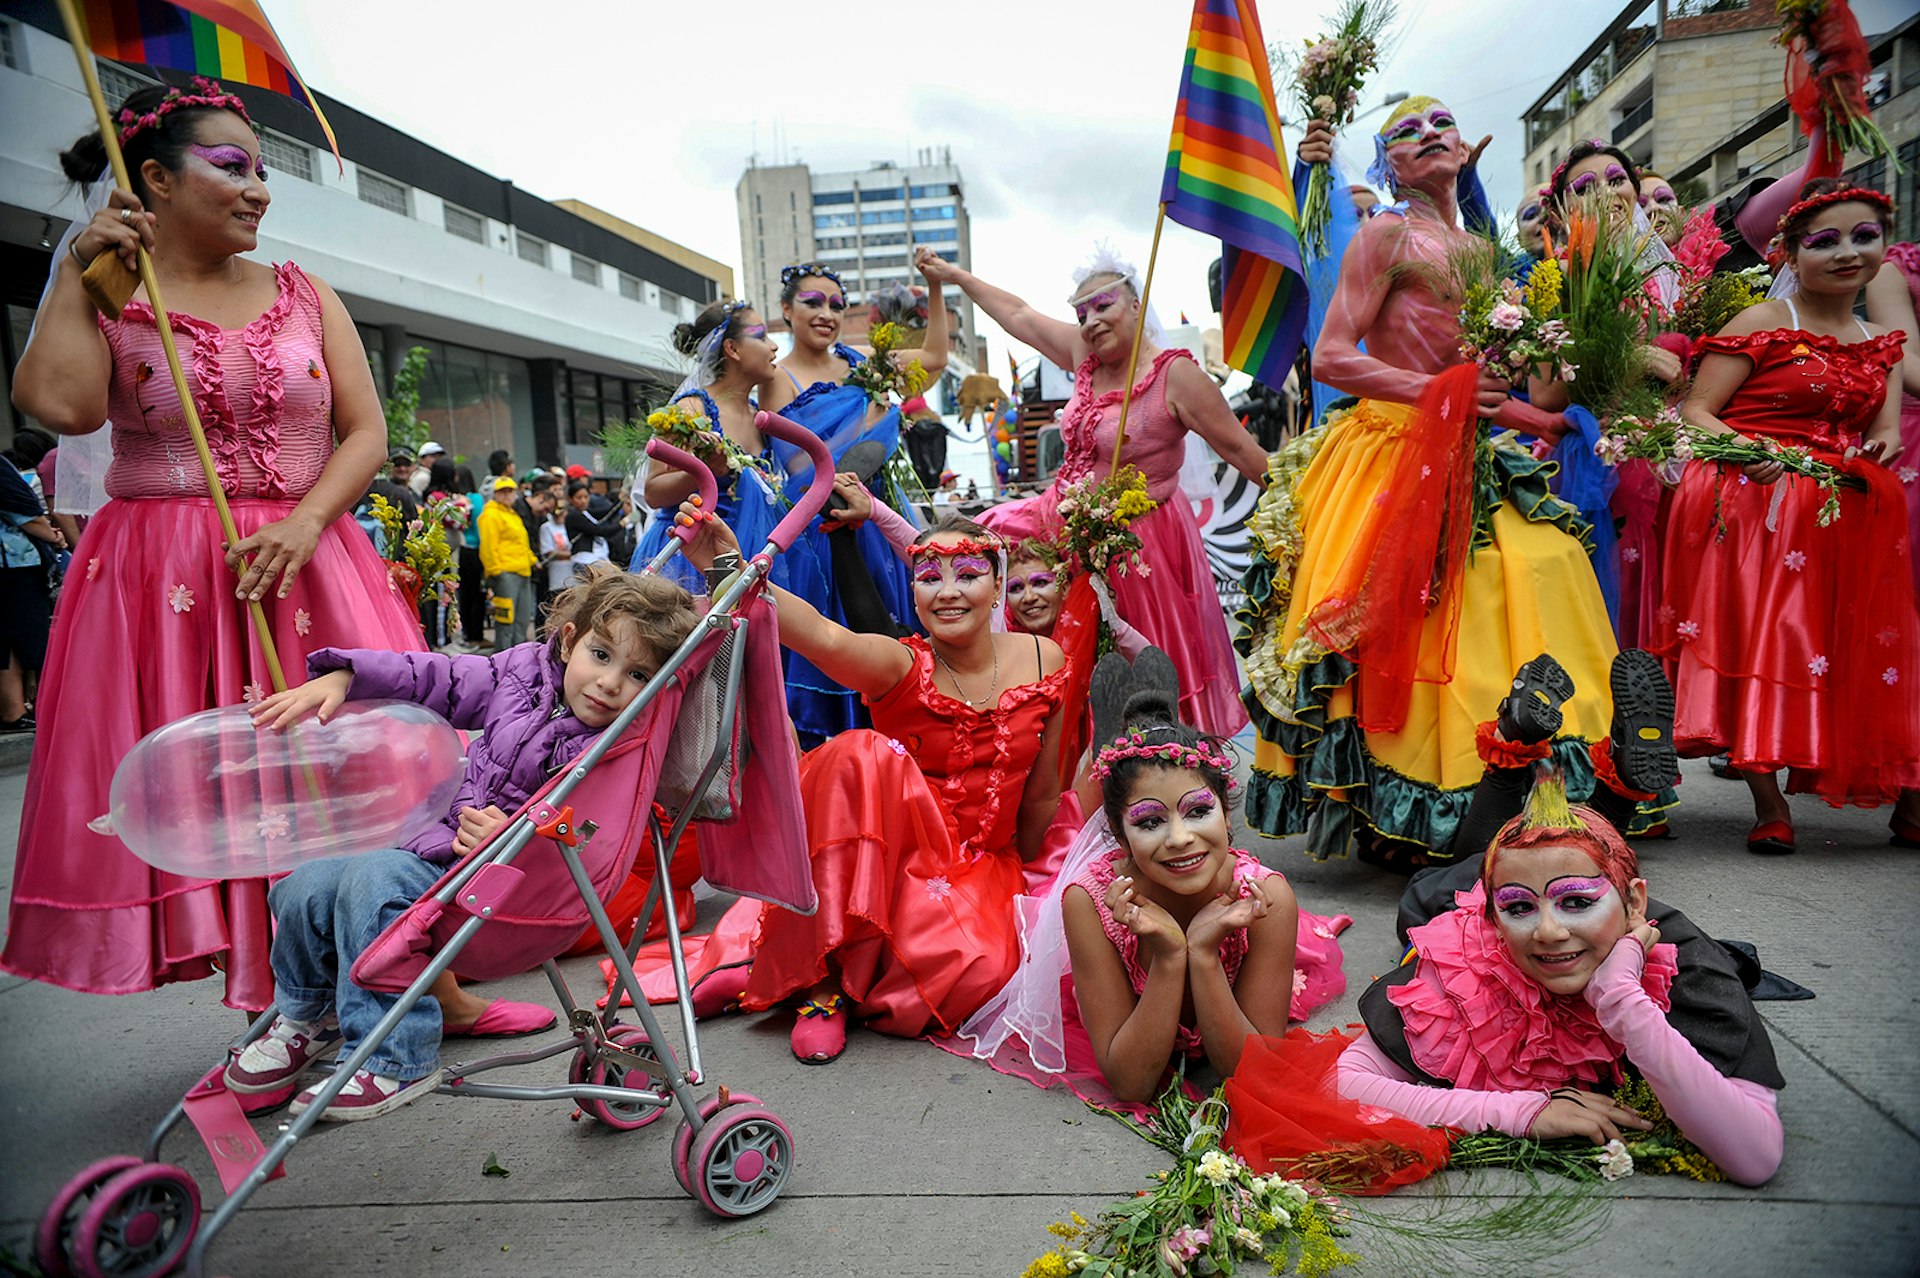 A group of people dressed in pink and red dresses hold Pride flags in Bogotá © GUILLERMO LEGARIA / GettyImages